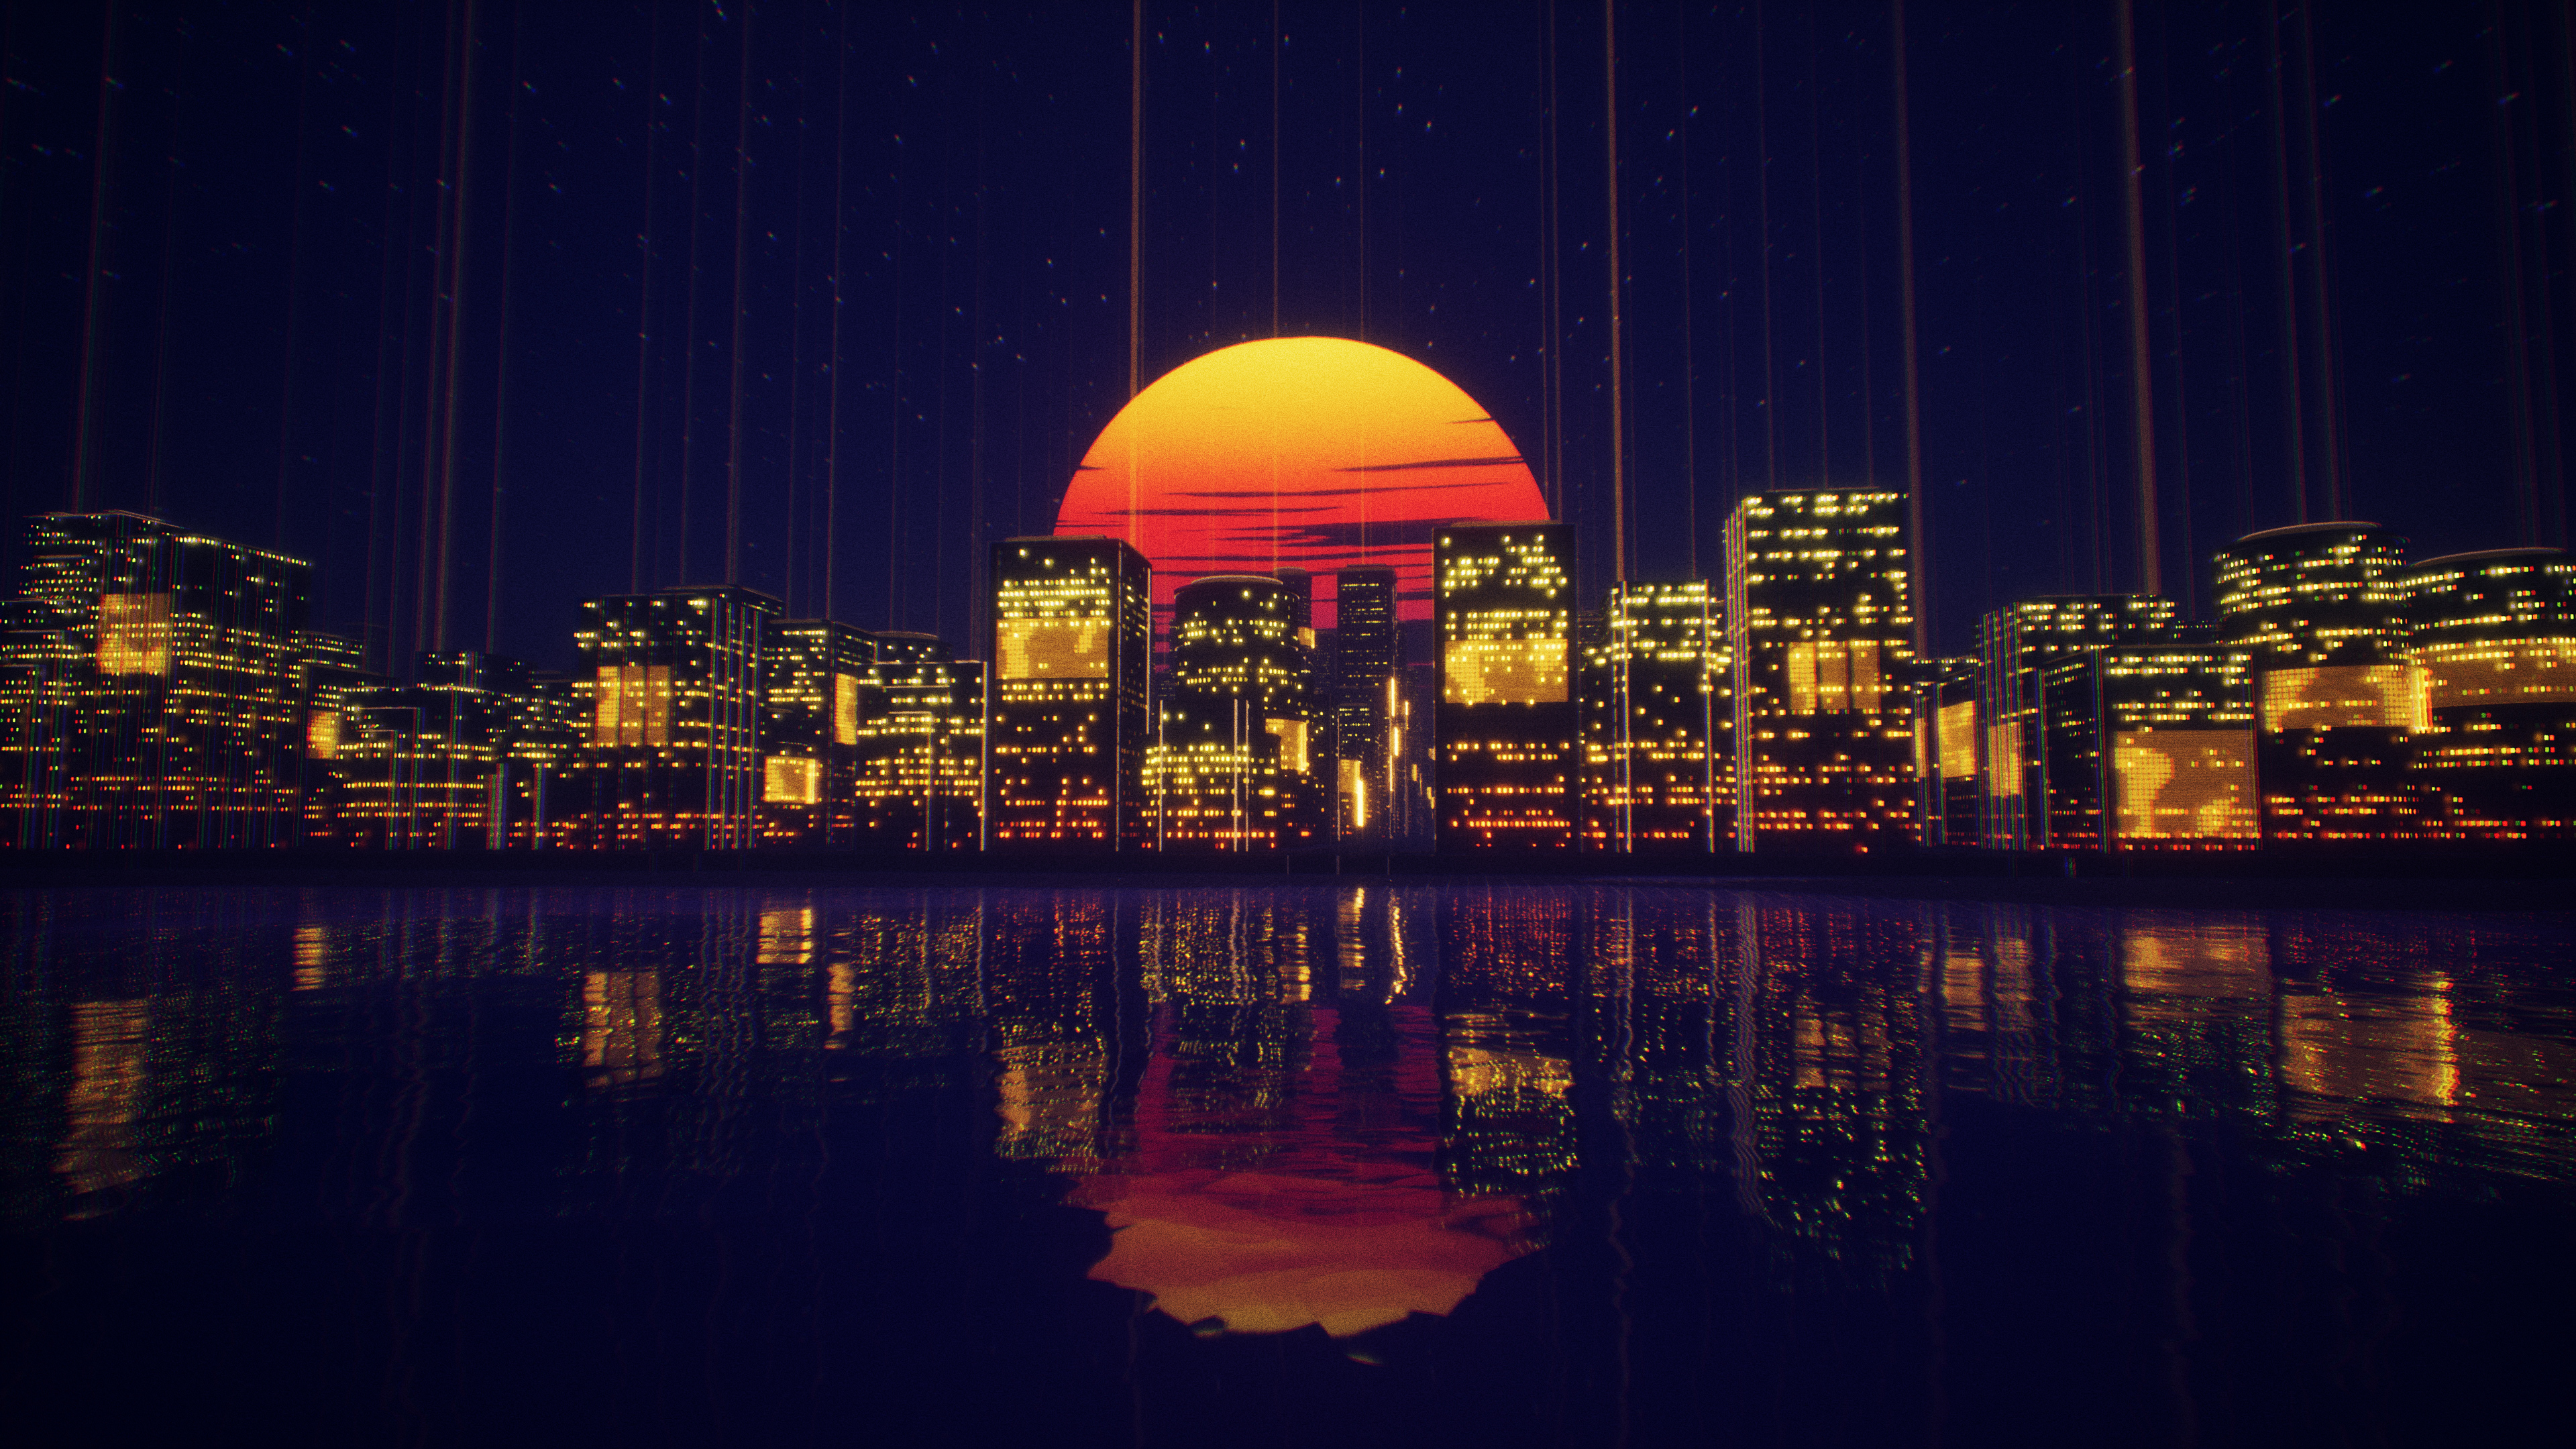 Abstract City Retro Sunset Night 4k, HD Artist, 4k Wallpapers, Images